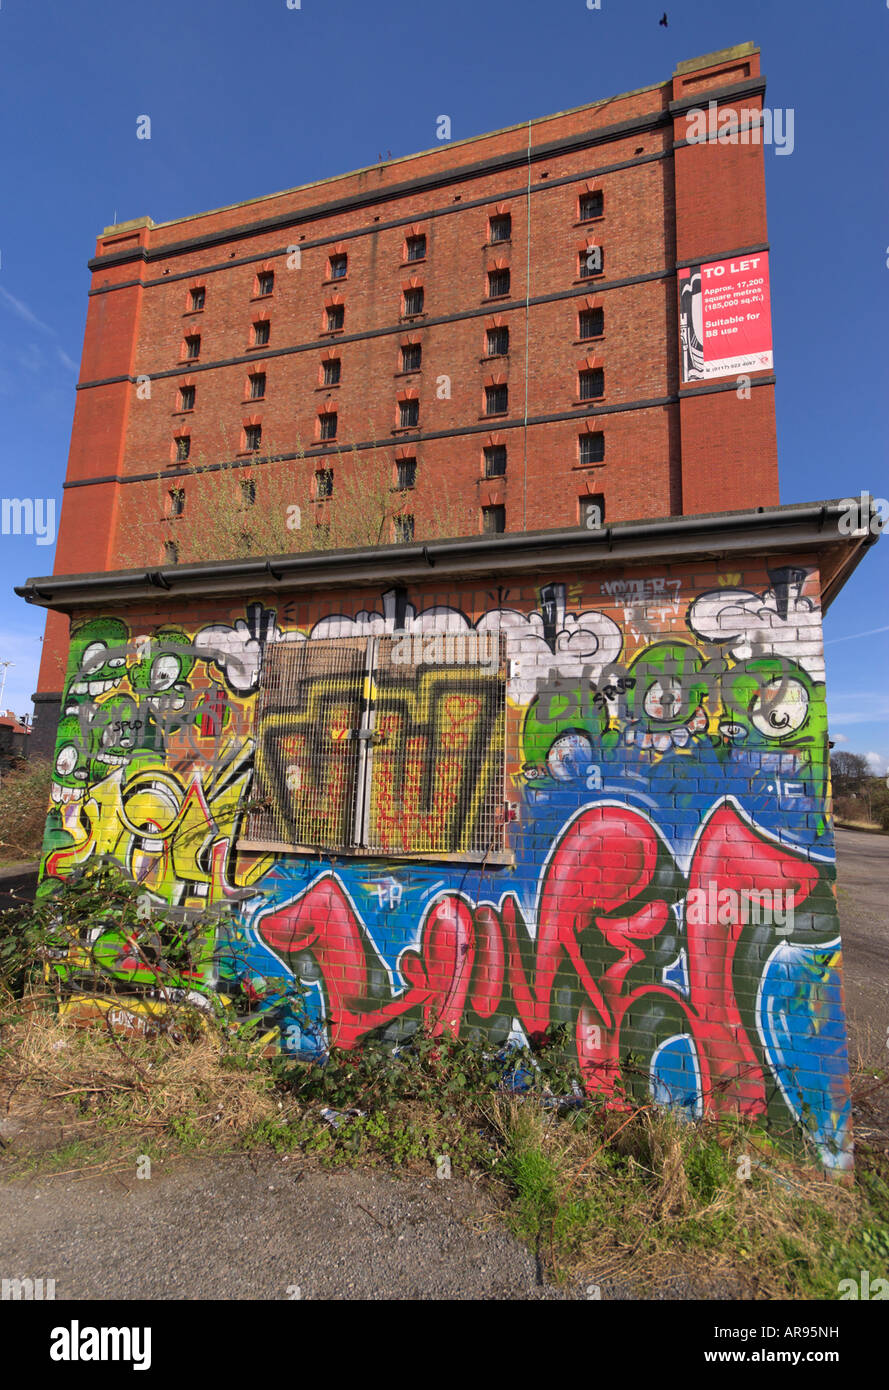 Graffiti covering the wall of a small brick built hut, with a large storage warehouse behind it in Bristol, UK Stock Photo